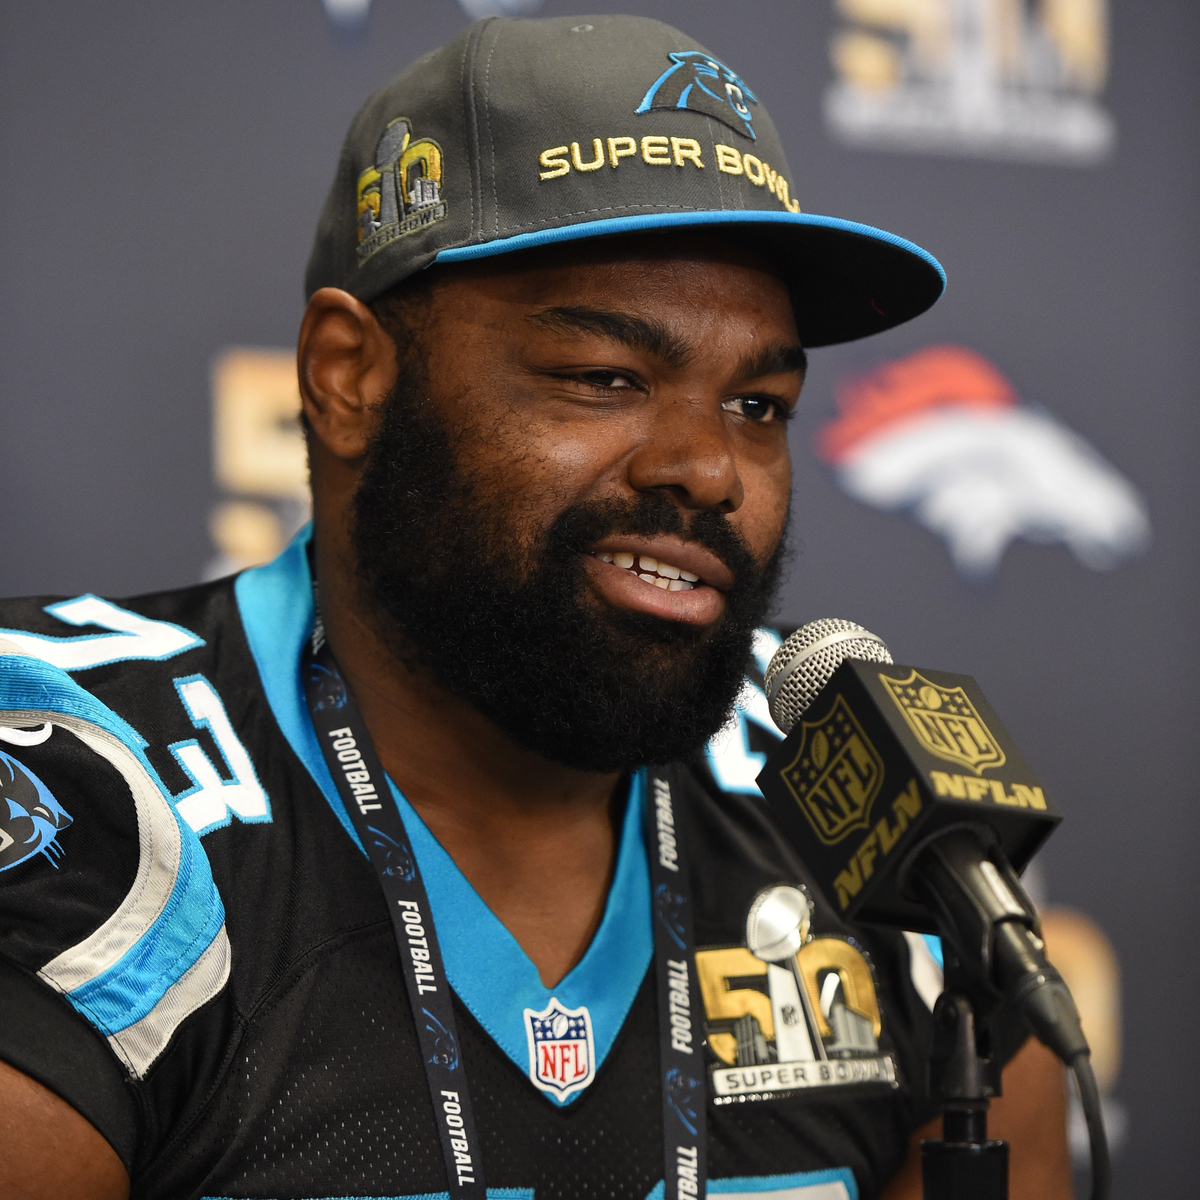 Tuohy Family Lawyer Slams Michael Oher’s Lawsuit as “Shakedown Effort”